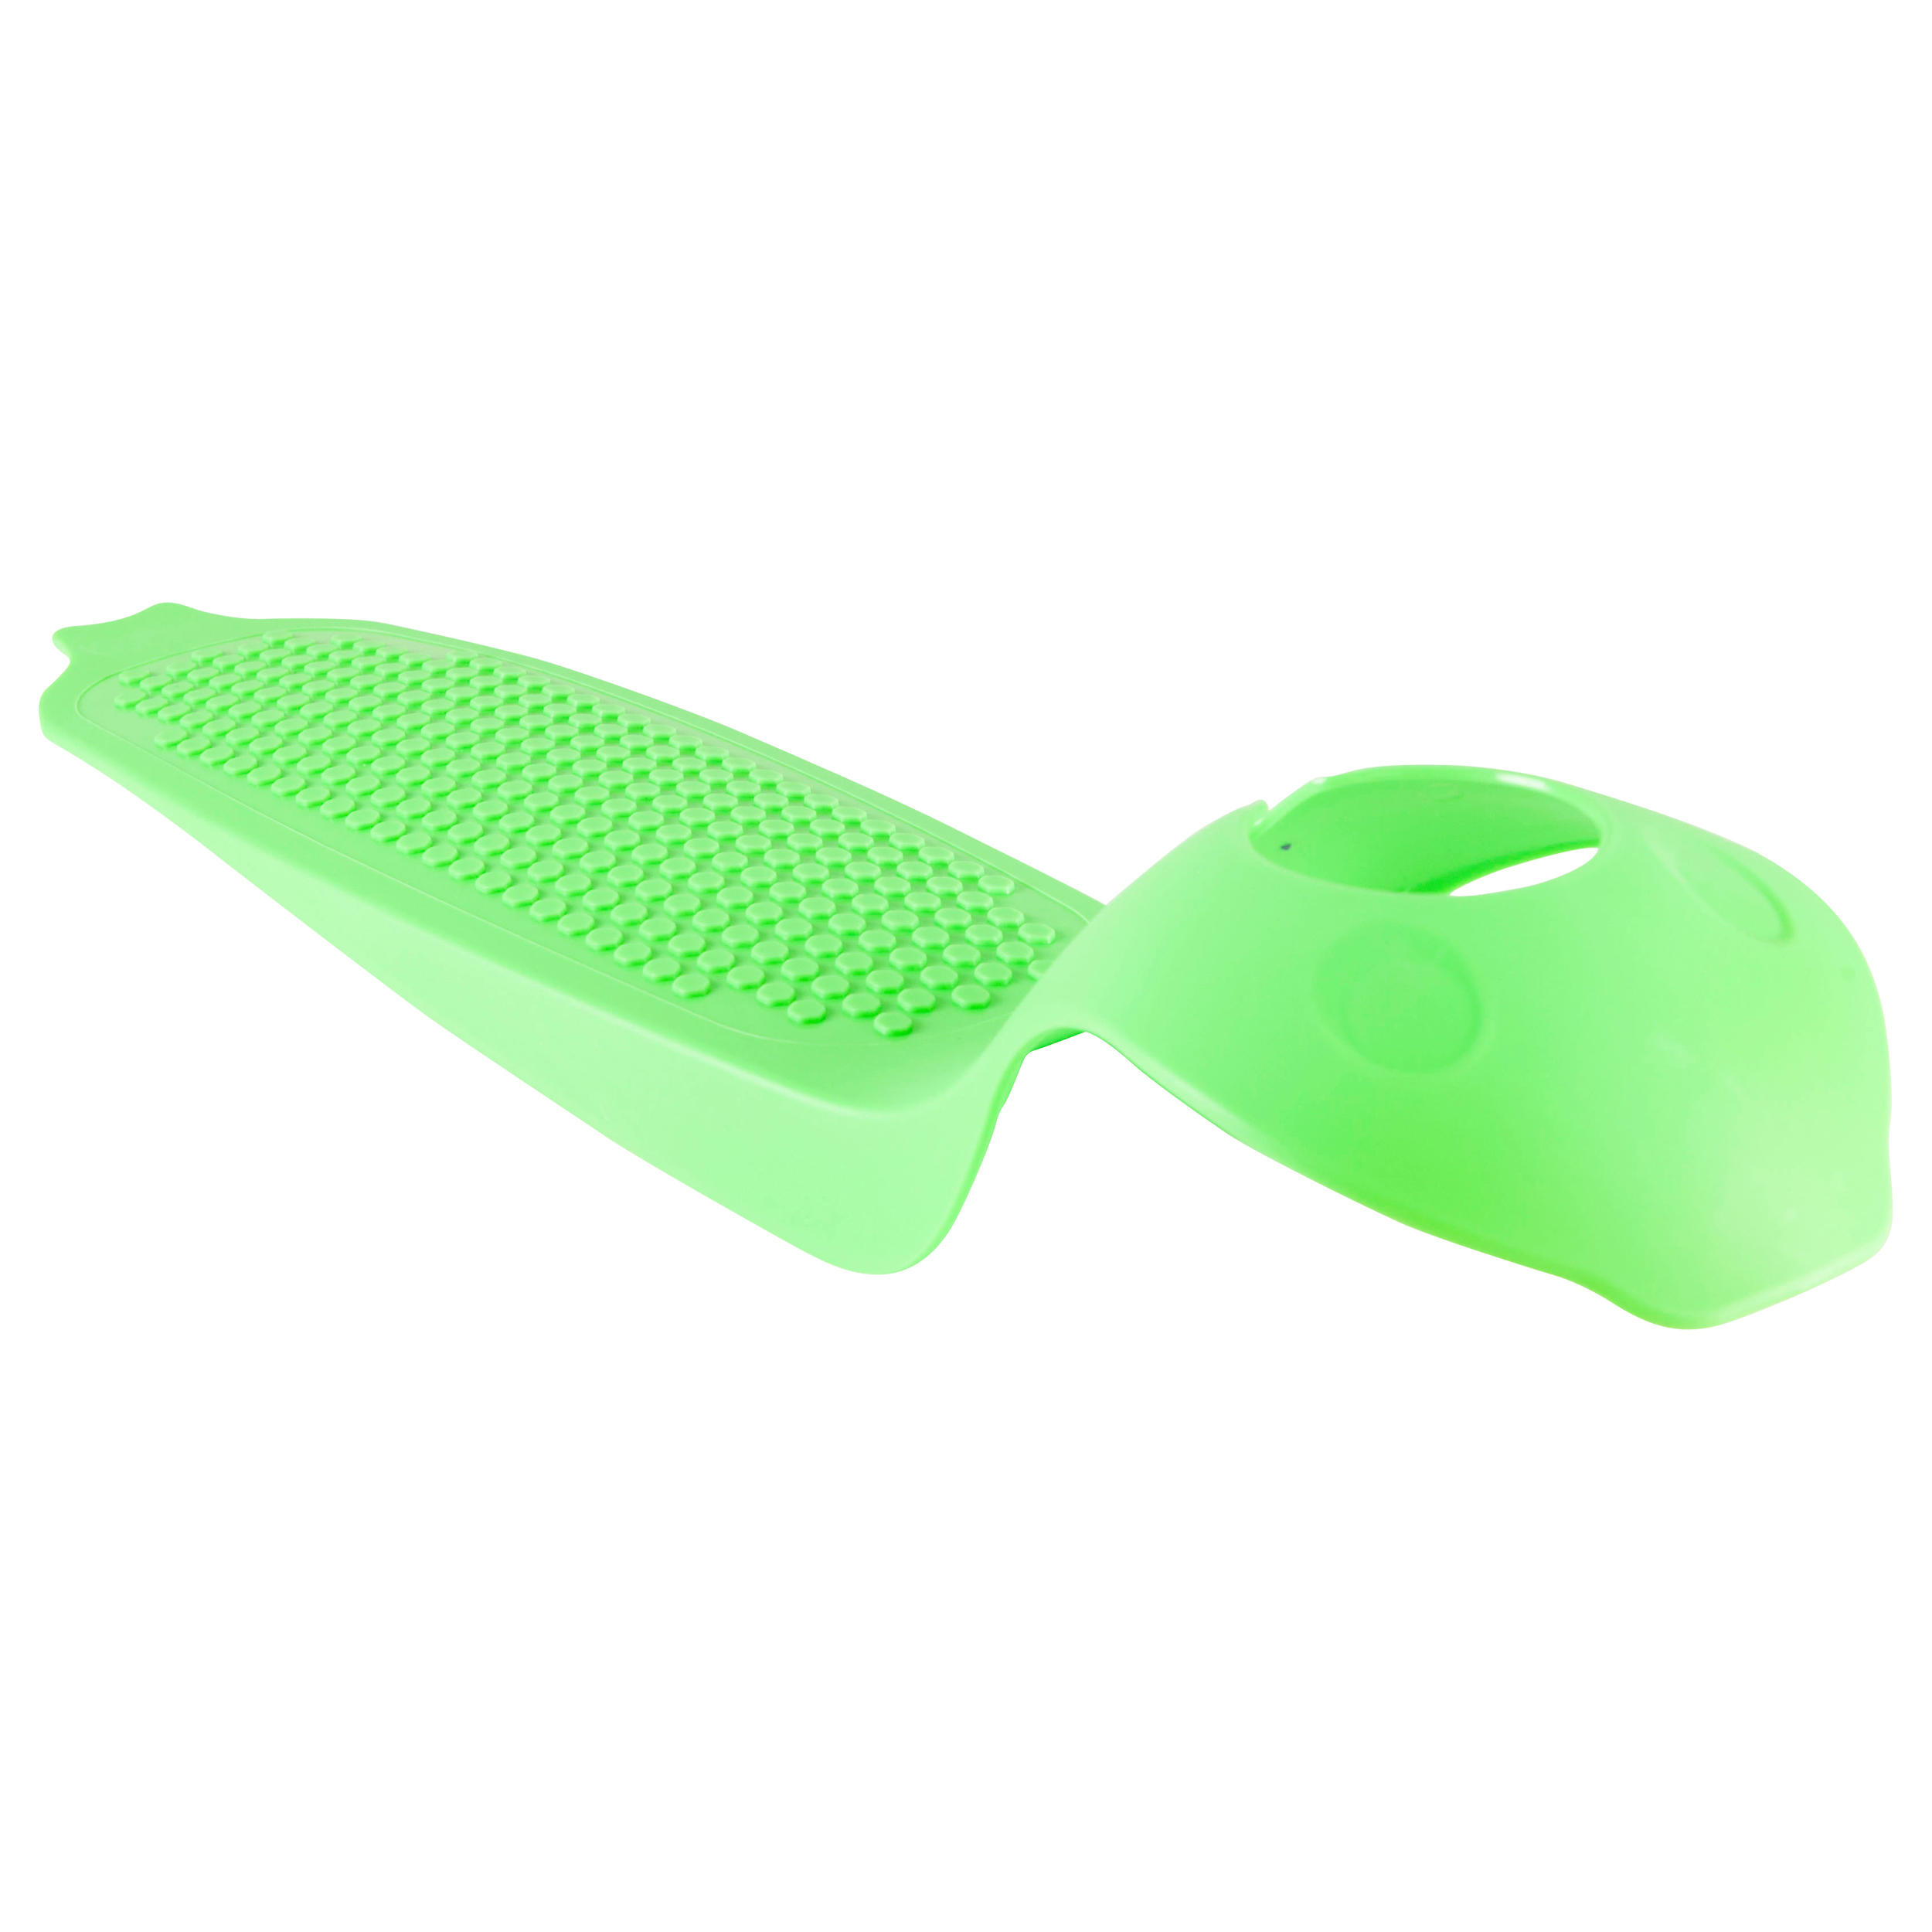 B1 Scooter Shell - Green 2/13